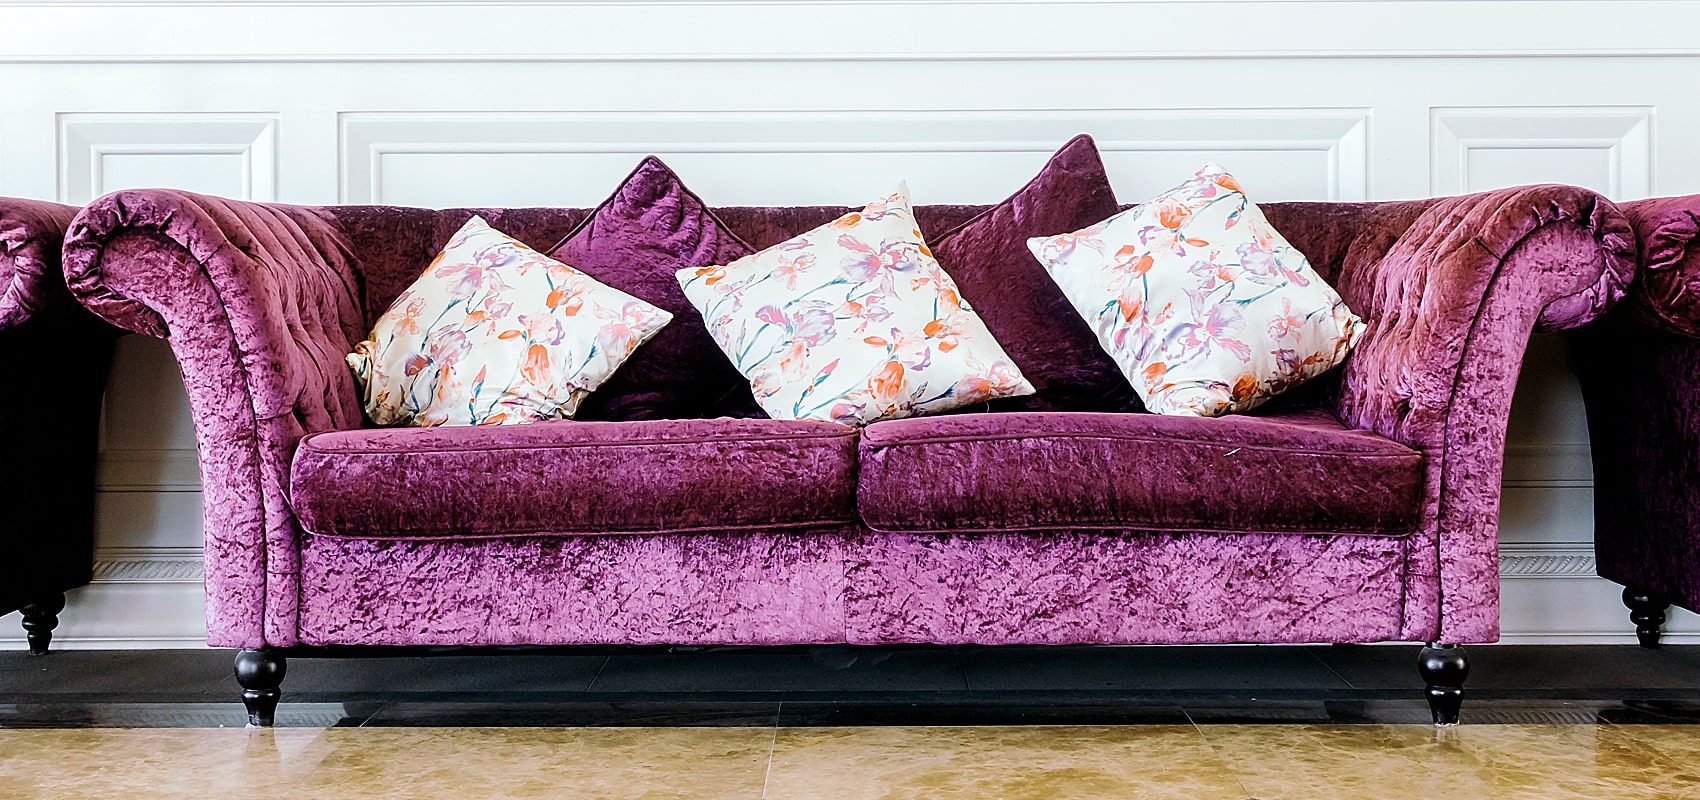 A velvet purple sofa may transform a space with its luxurious elegance. Velvet and a rich purple give this striking statement item refinement. 